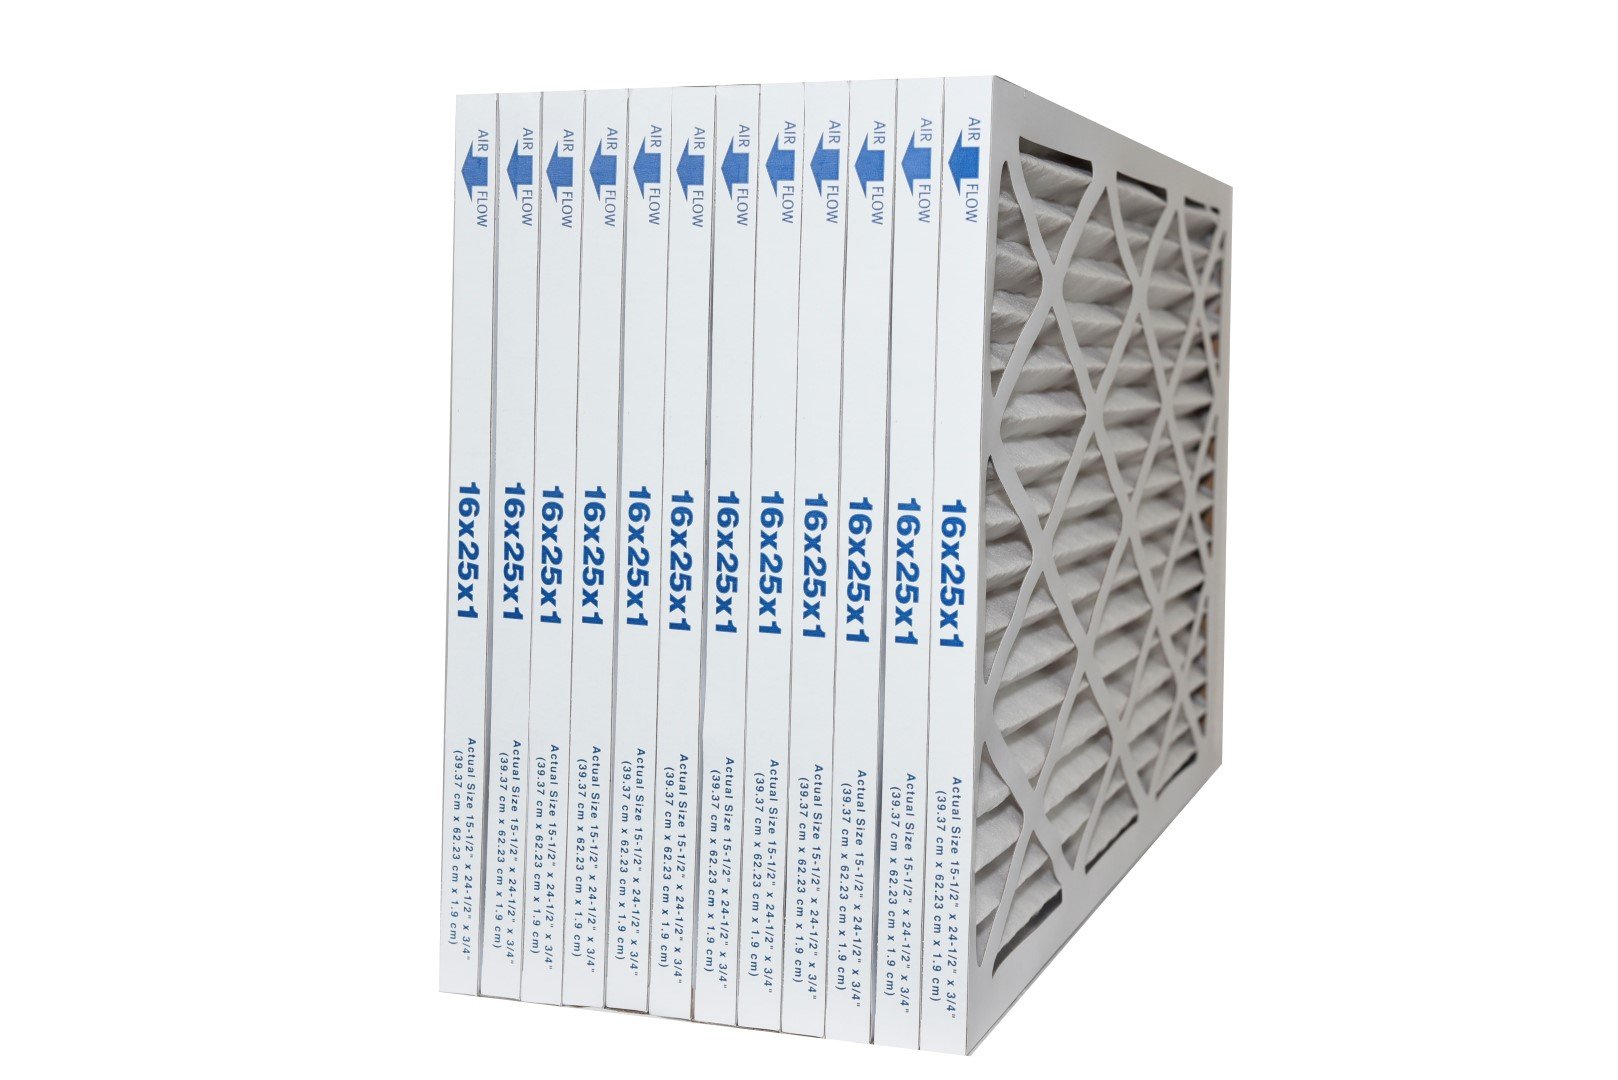 16x25x1 MERV 11 Furnace Air Filter, Pleated Material. Case of 12